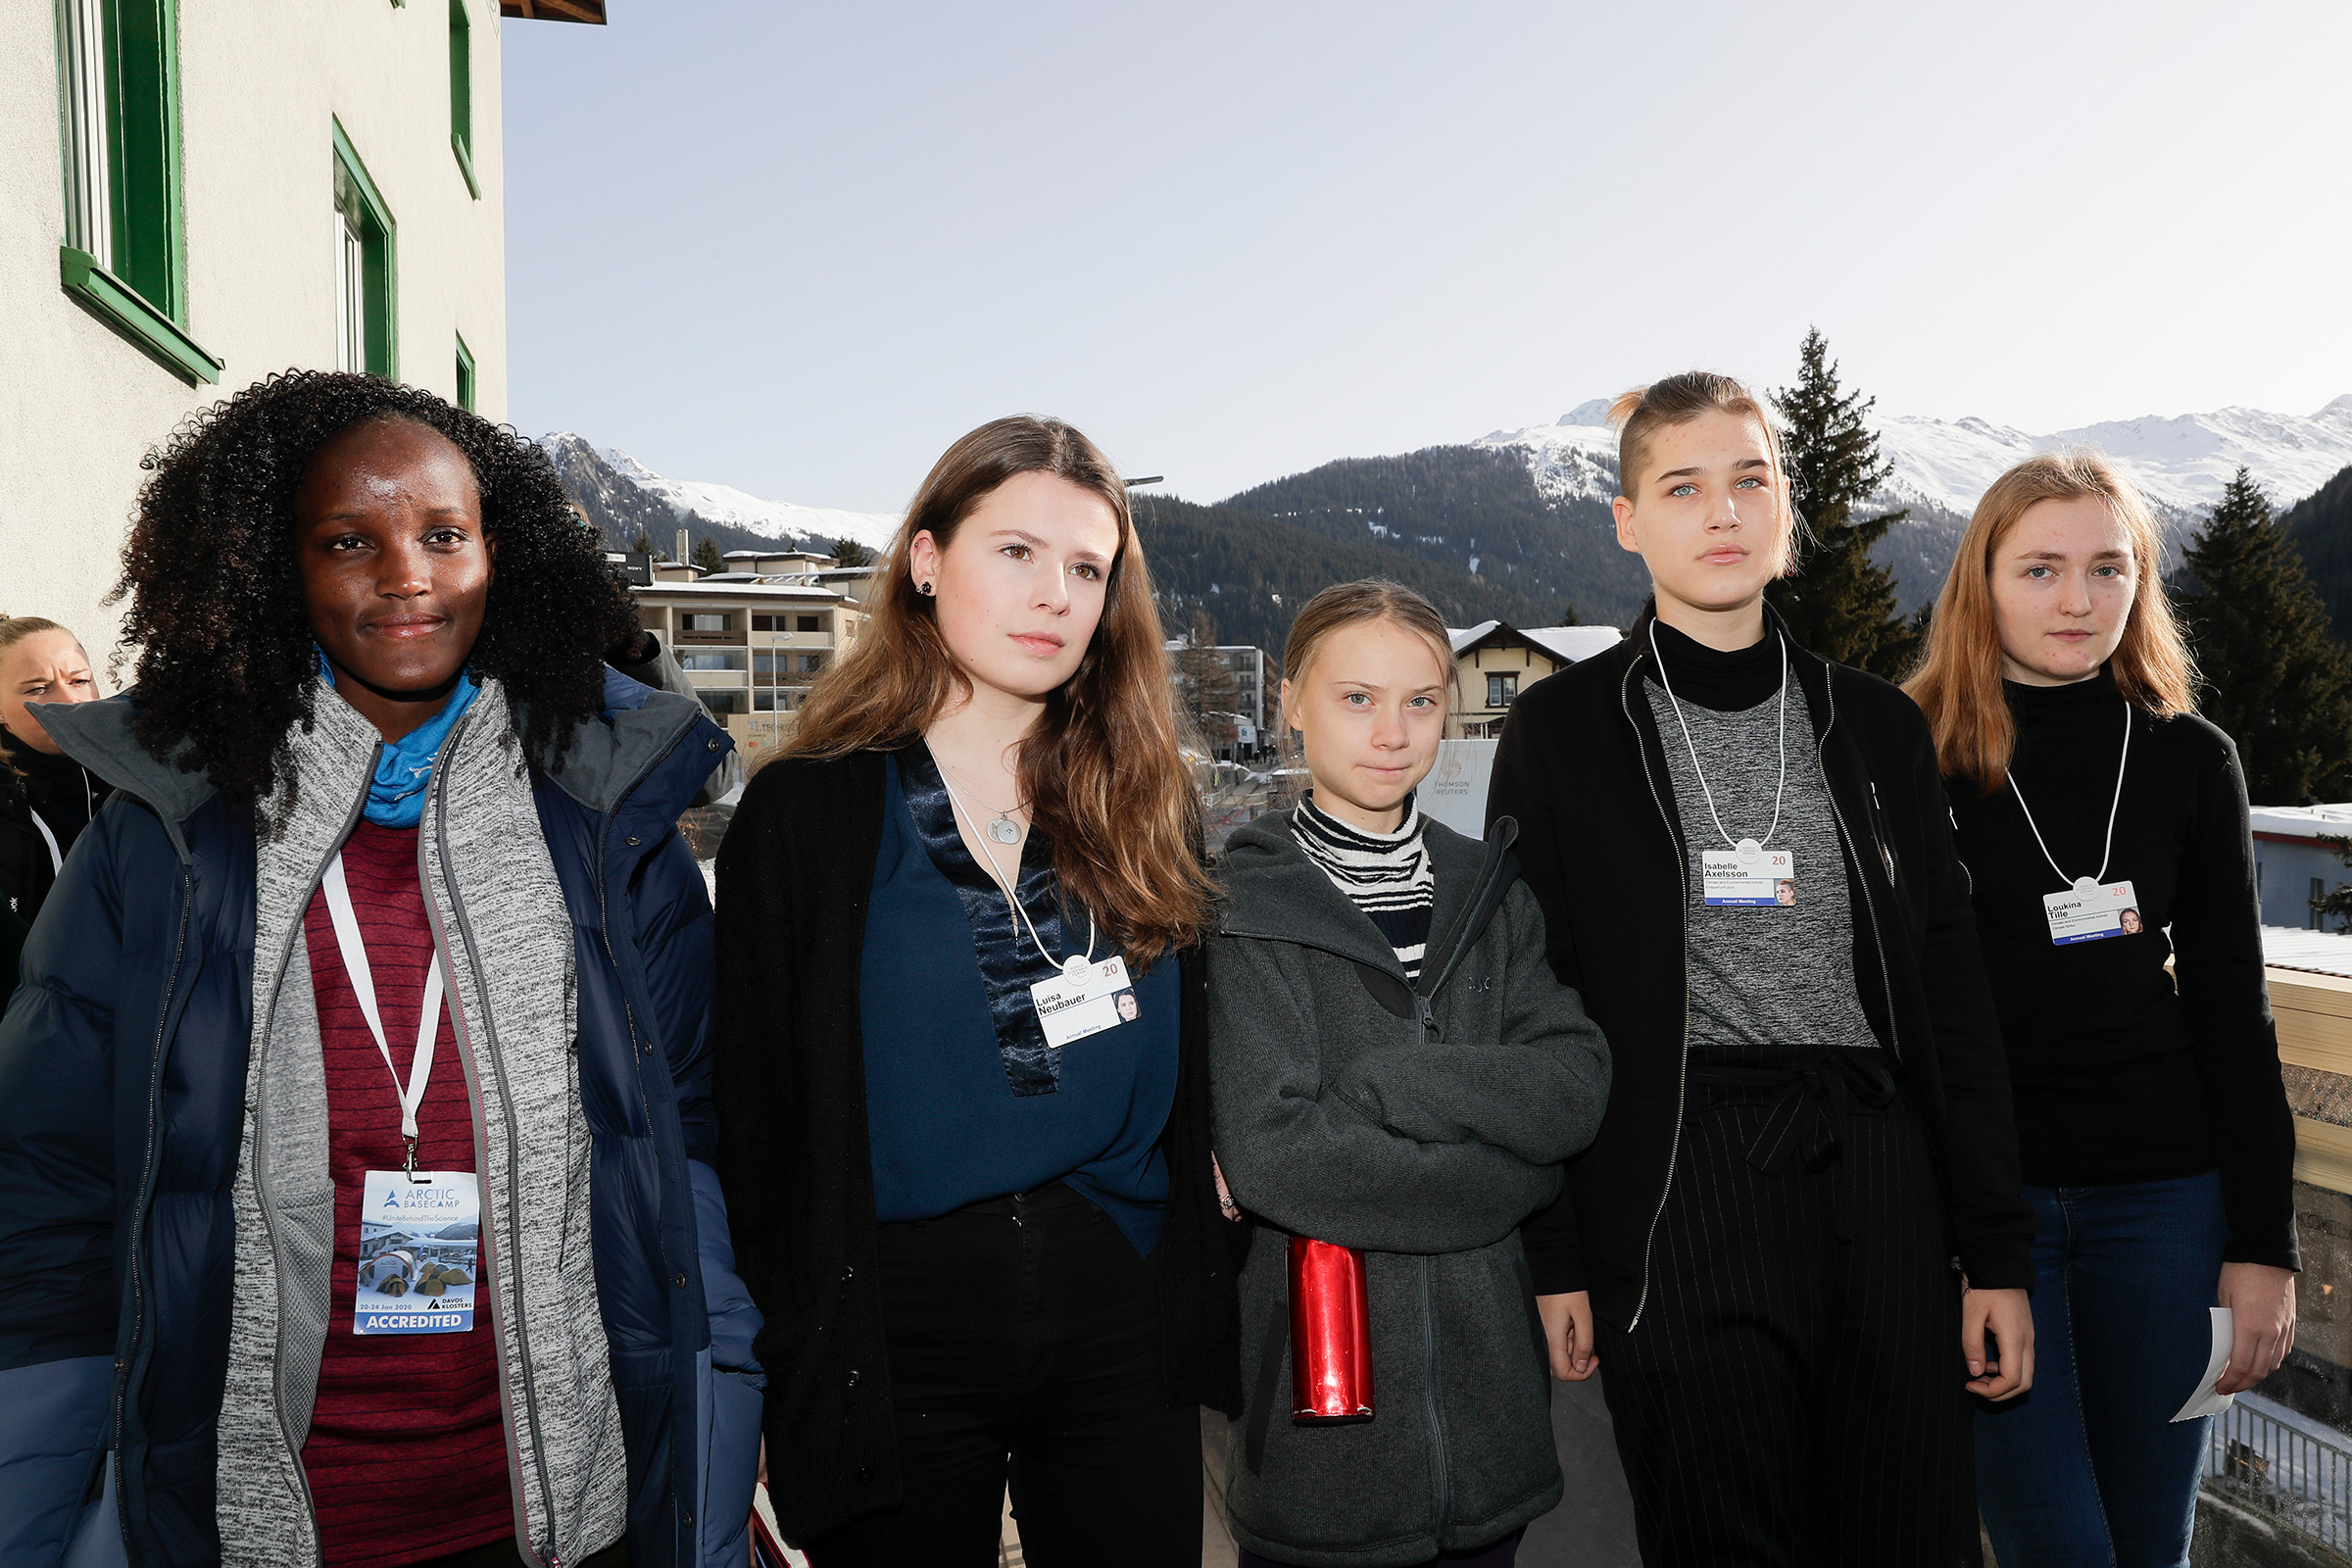 In January, the AP cropped Nakate out of a photo of young climate activists in Davos (Markus Schreiber—AP)